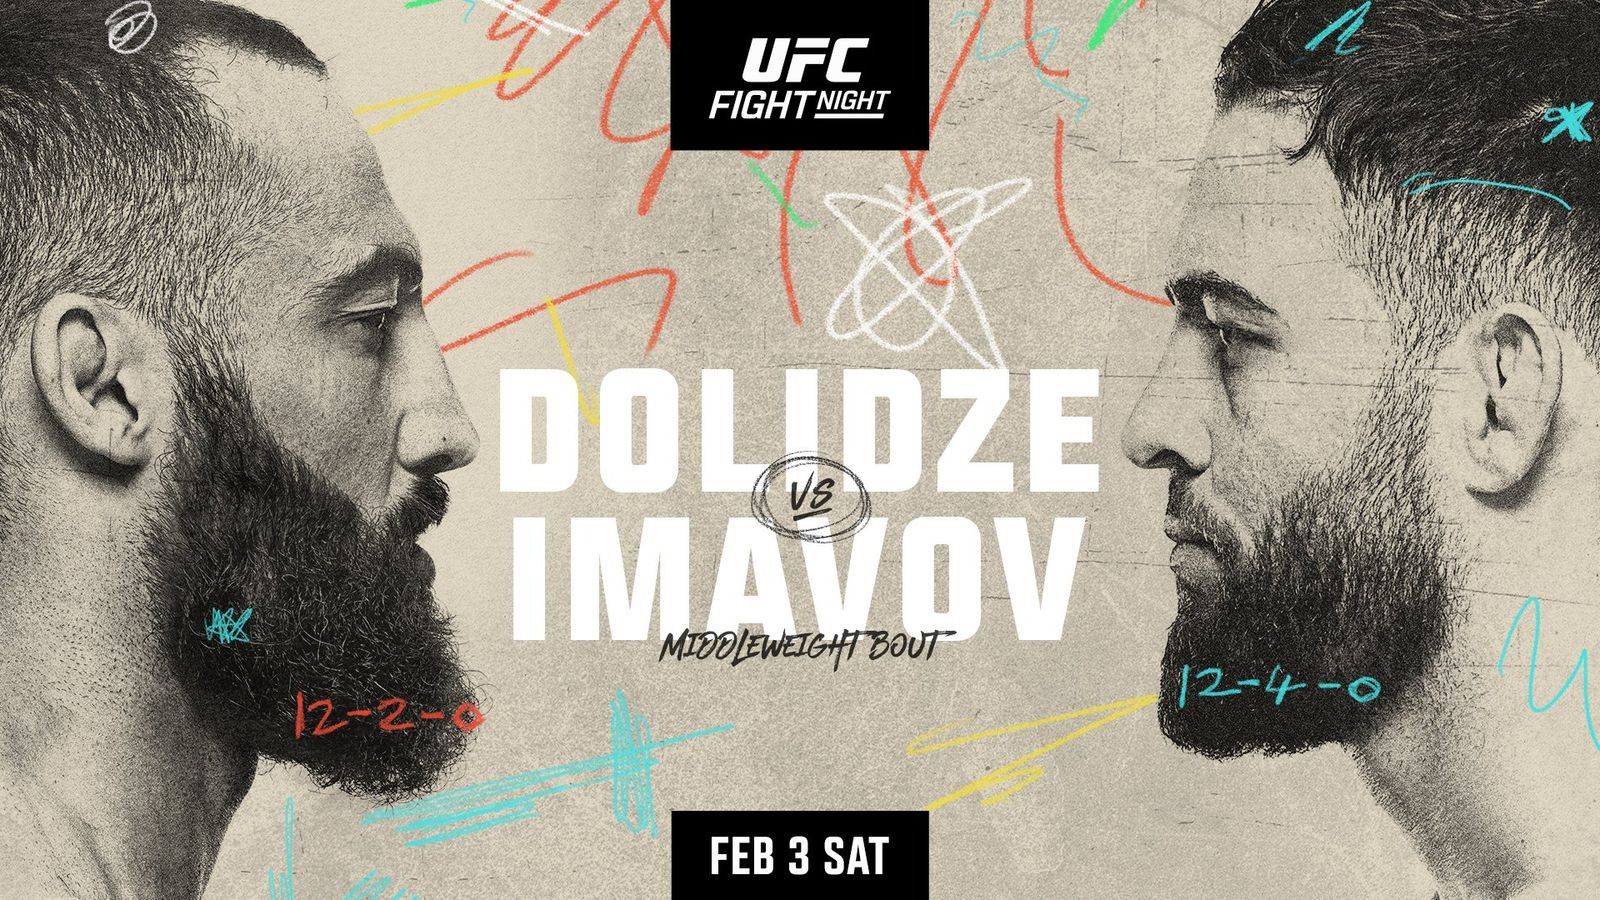 On February 4, Dolidze will headline a UFC event for the first time